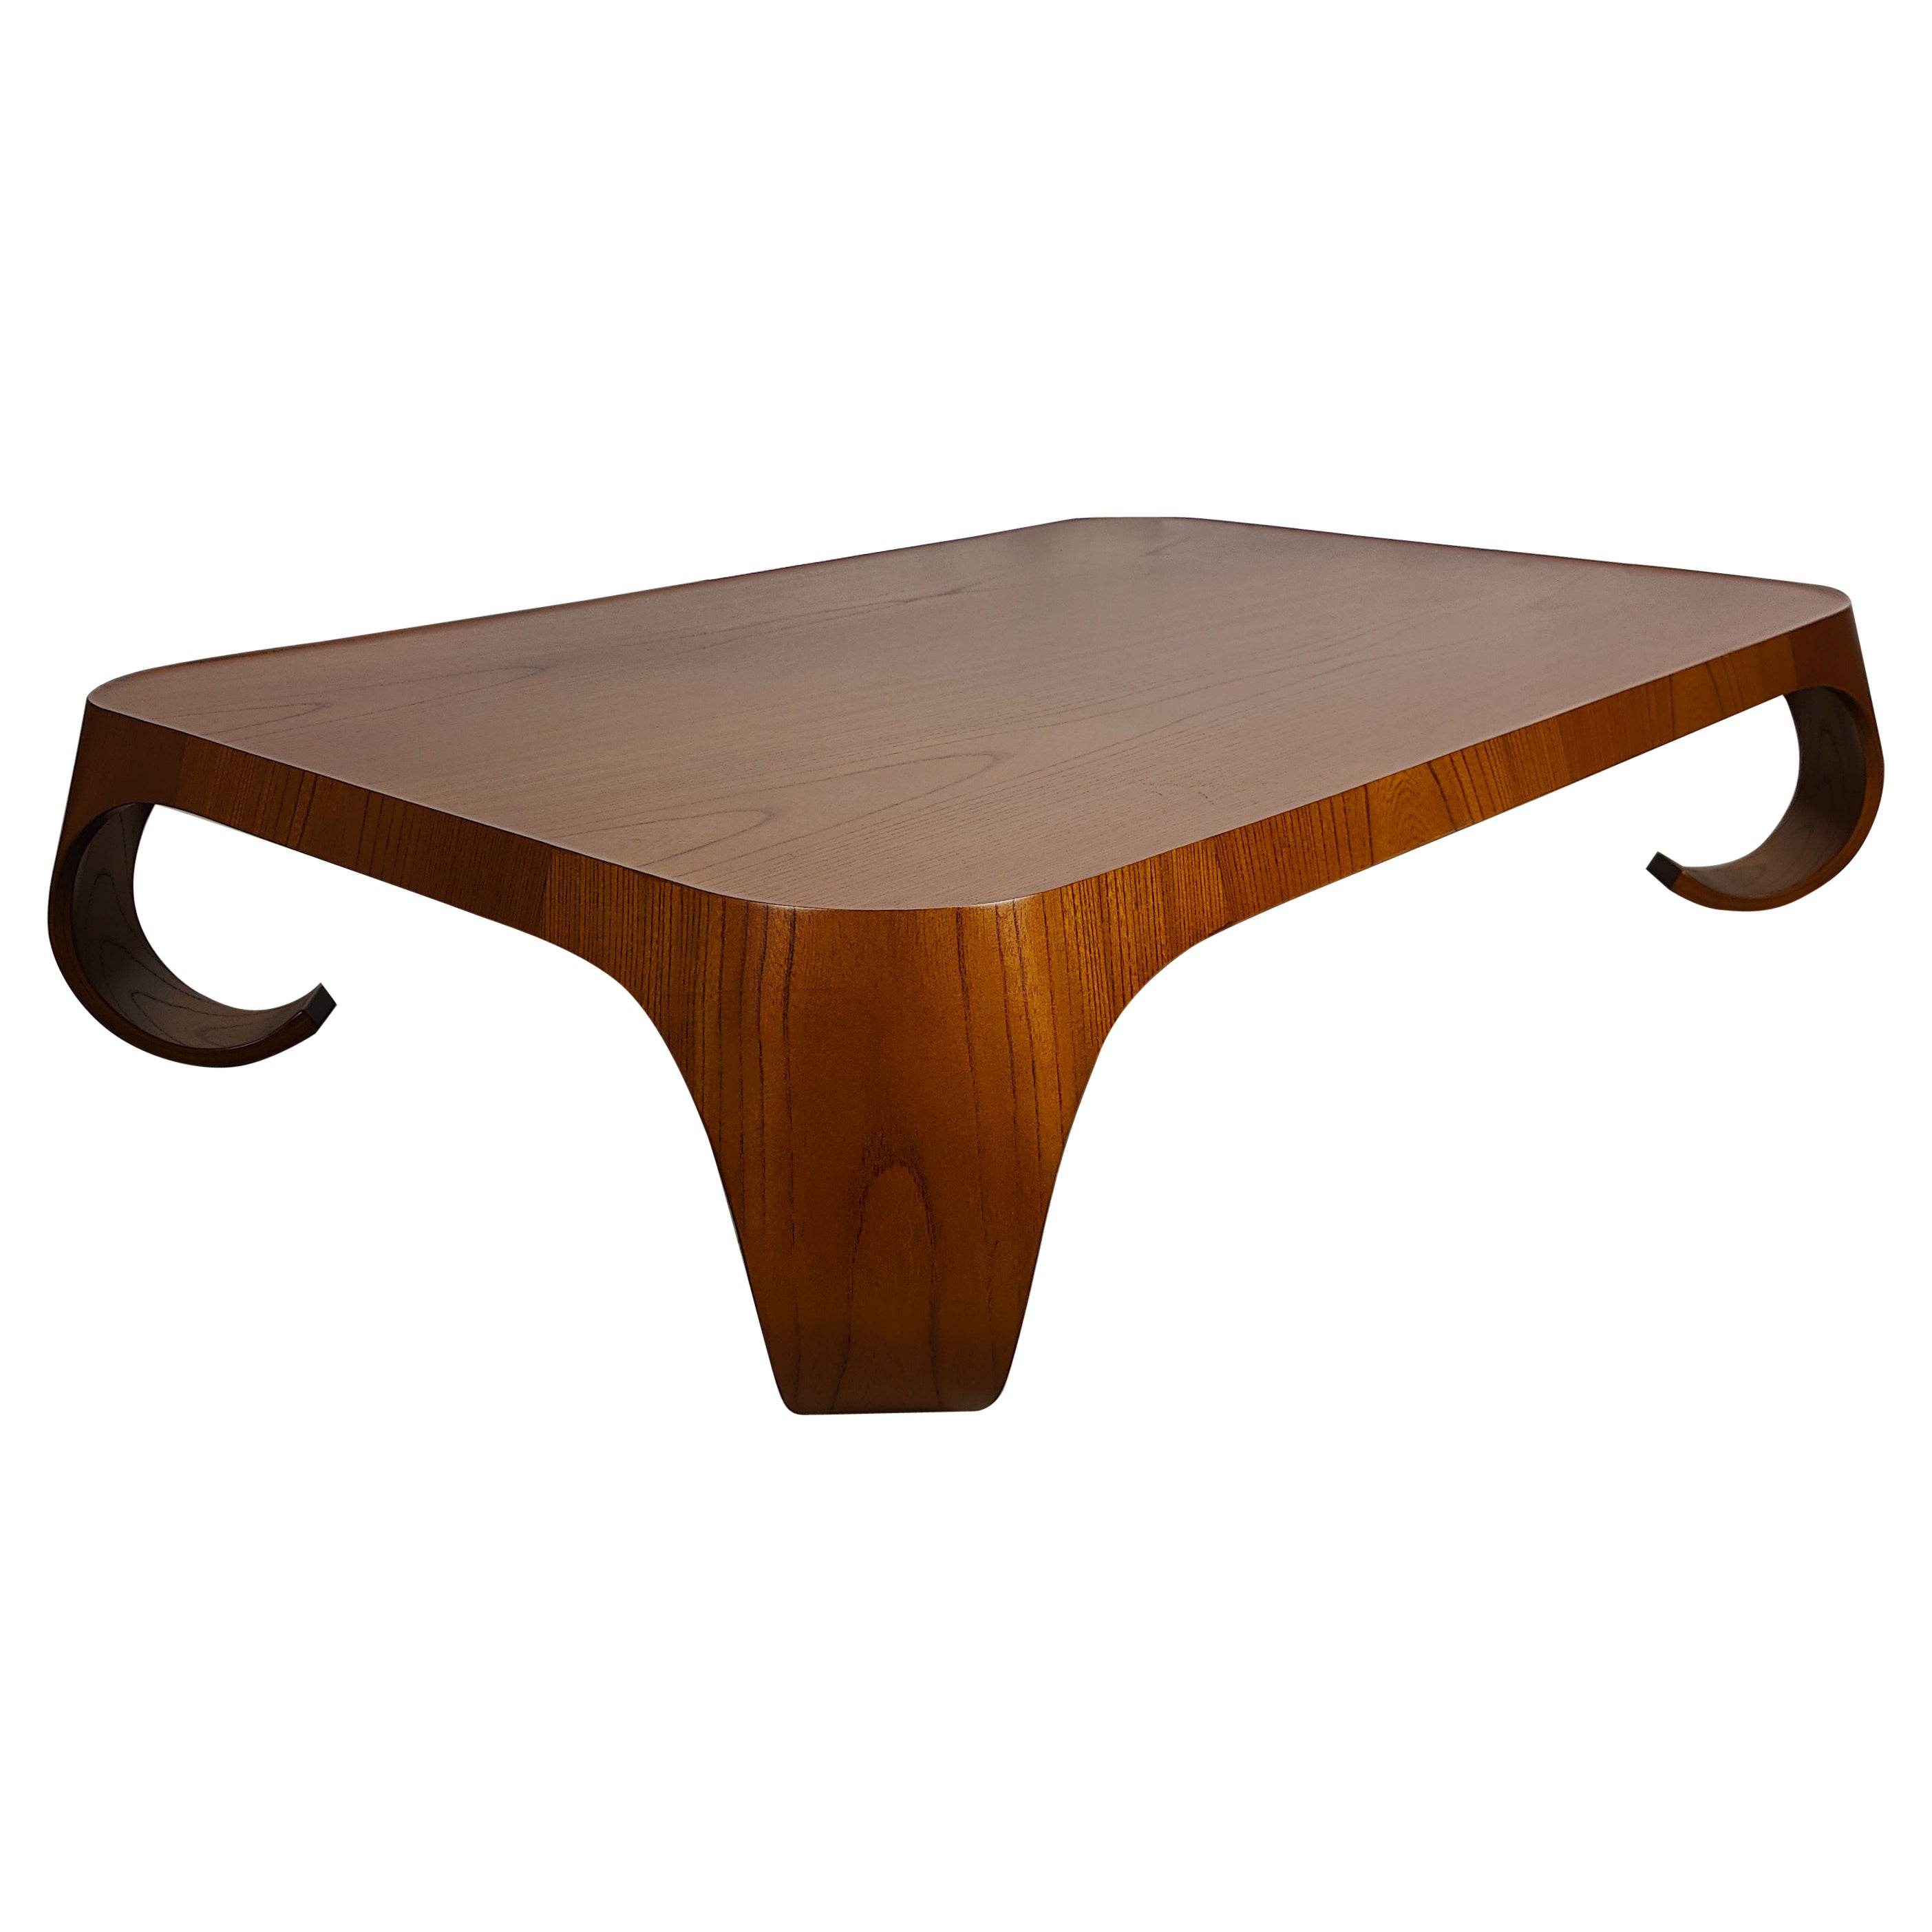 Japanese Modern Coffee Table By Isamu Kenmochi for Tendo Mokko For Sale